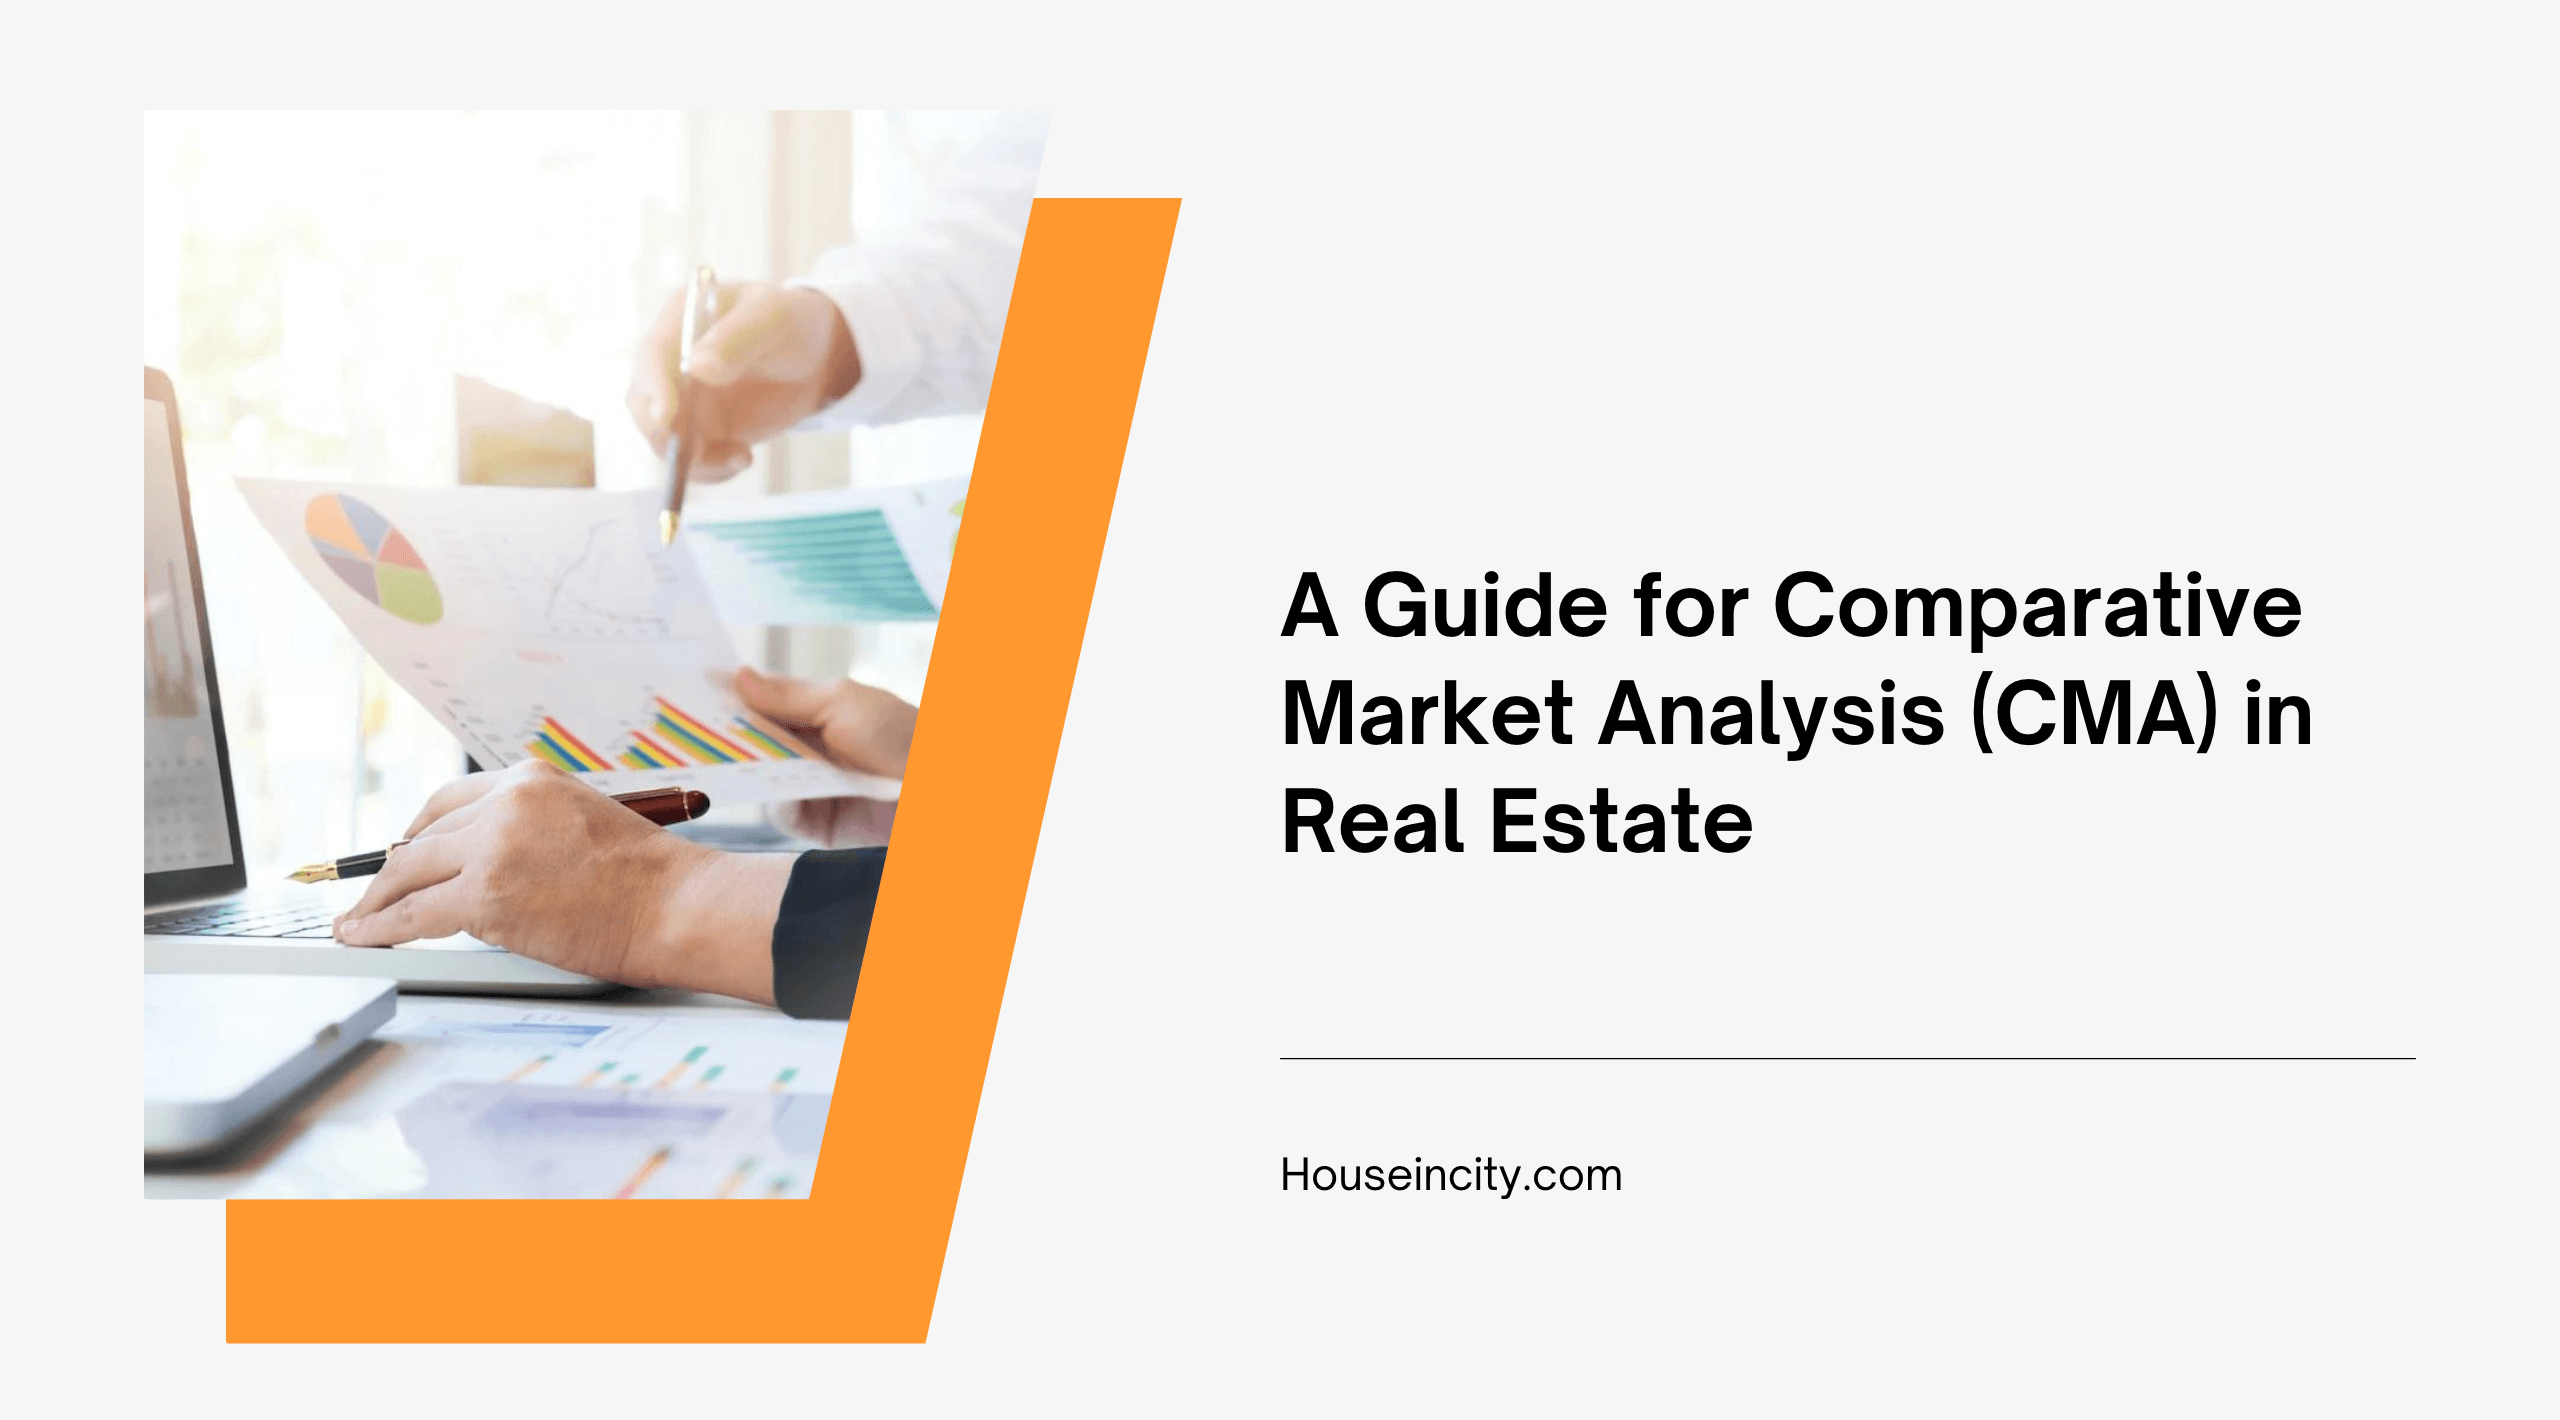 A Guide for Comparative Market Analysis (CMA) in Real Estate